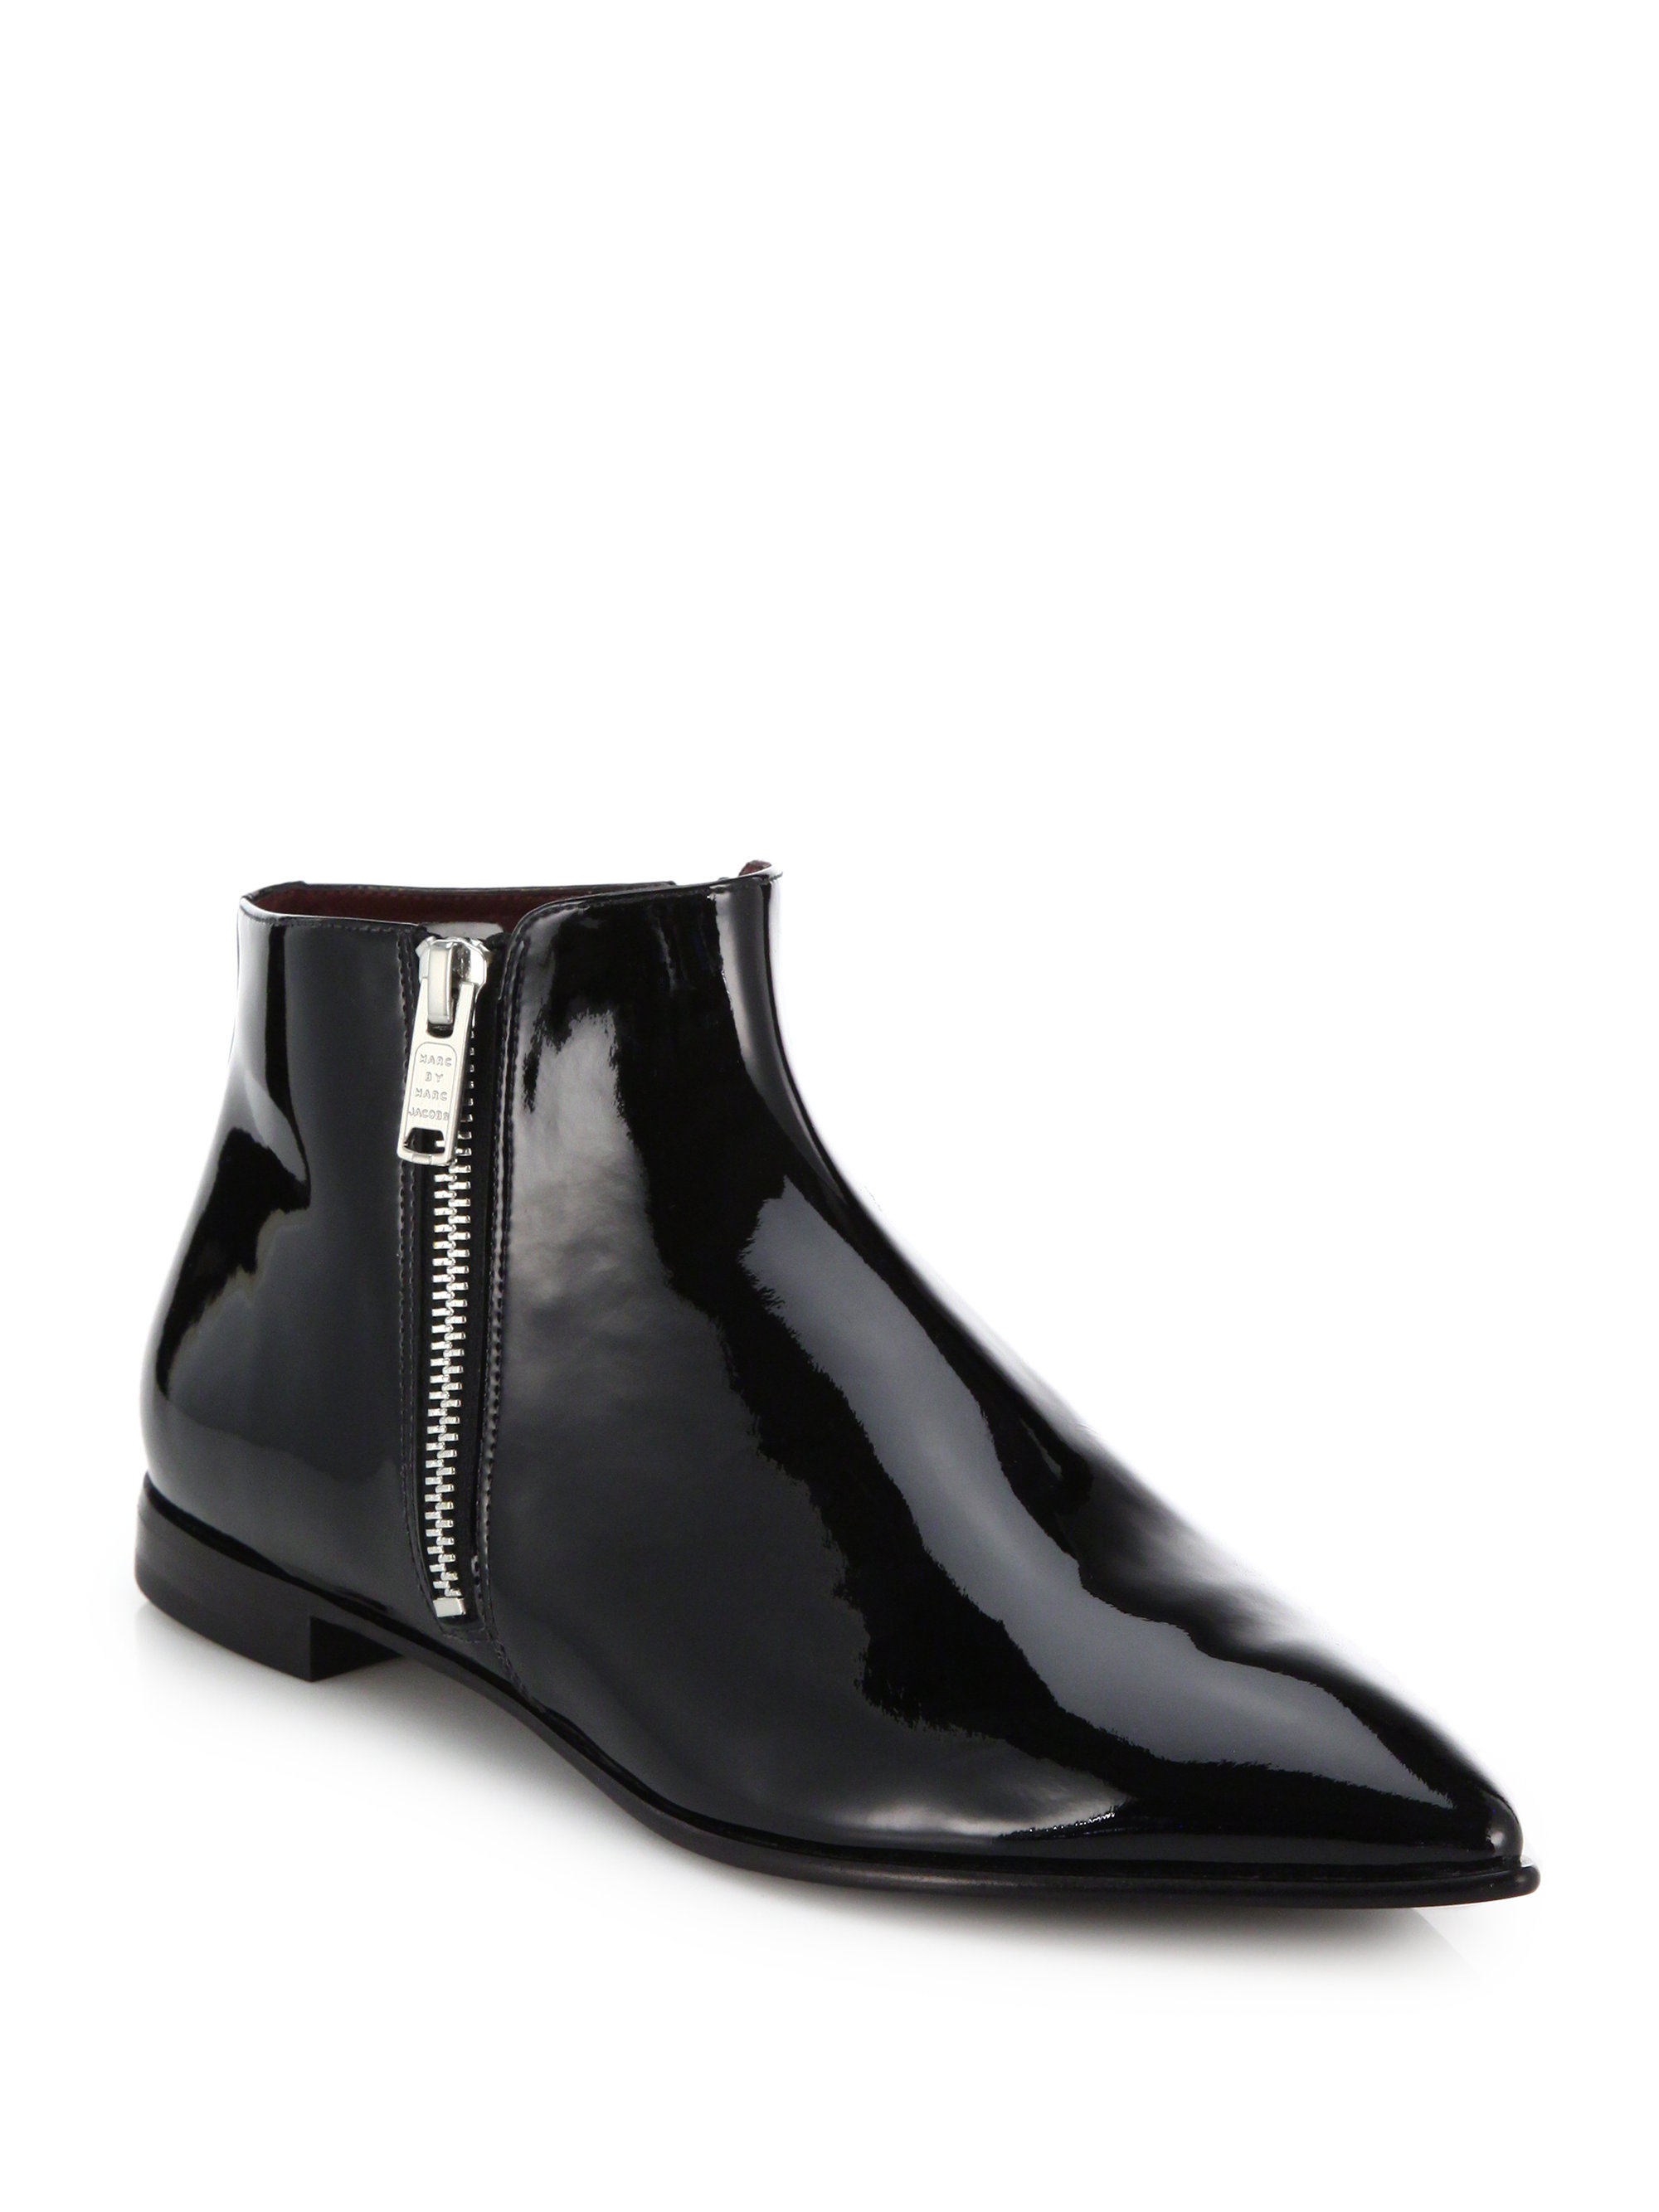 Lyst - Marc by marc jacobs Blake Double-zip Patent Leather Ankle Boots ...